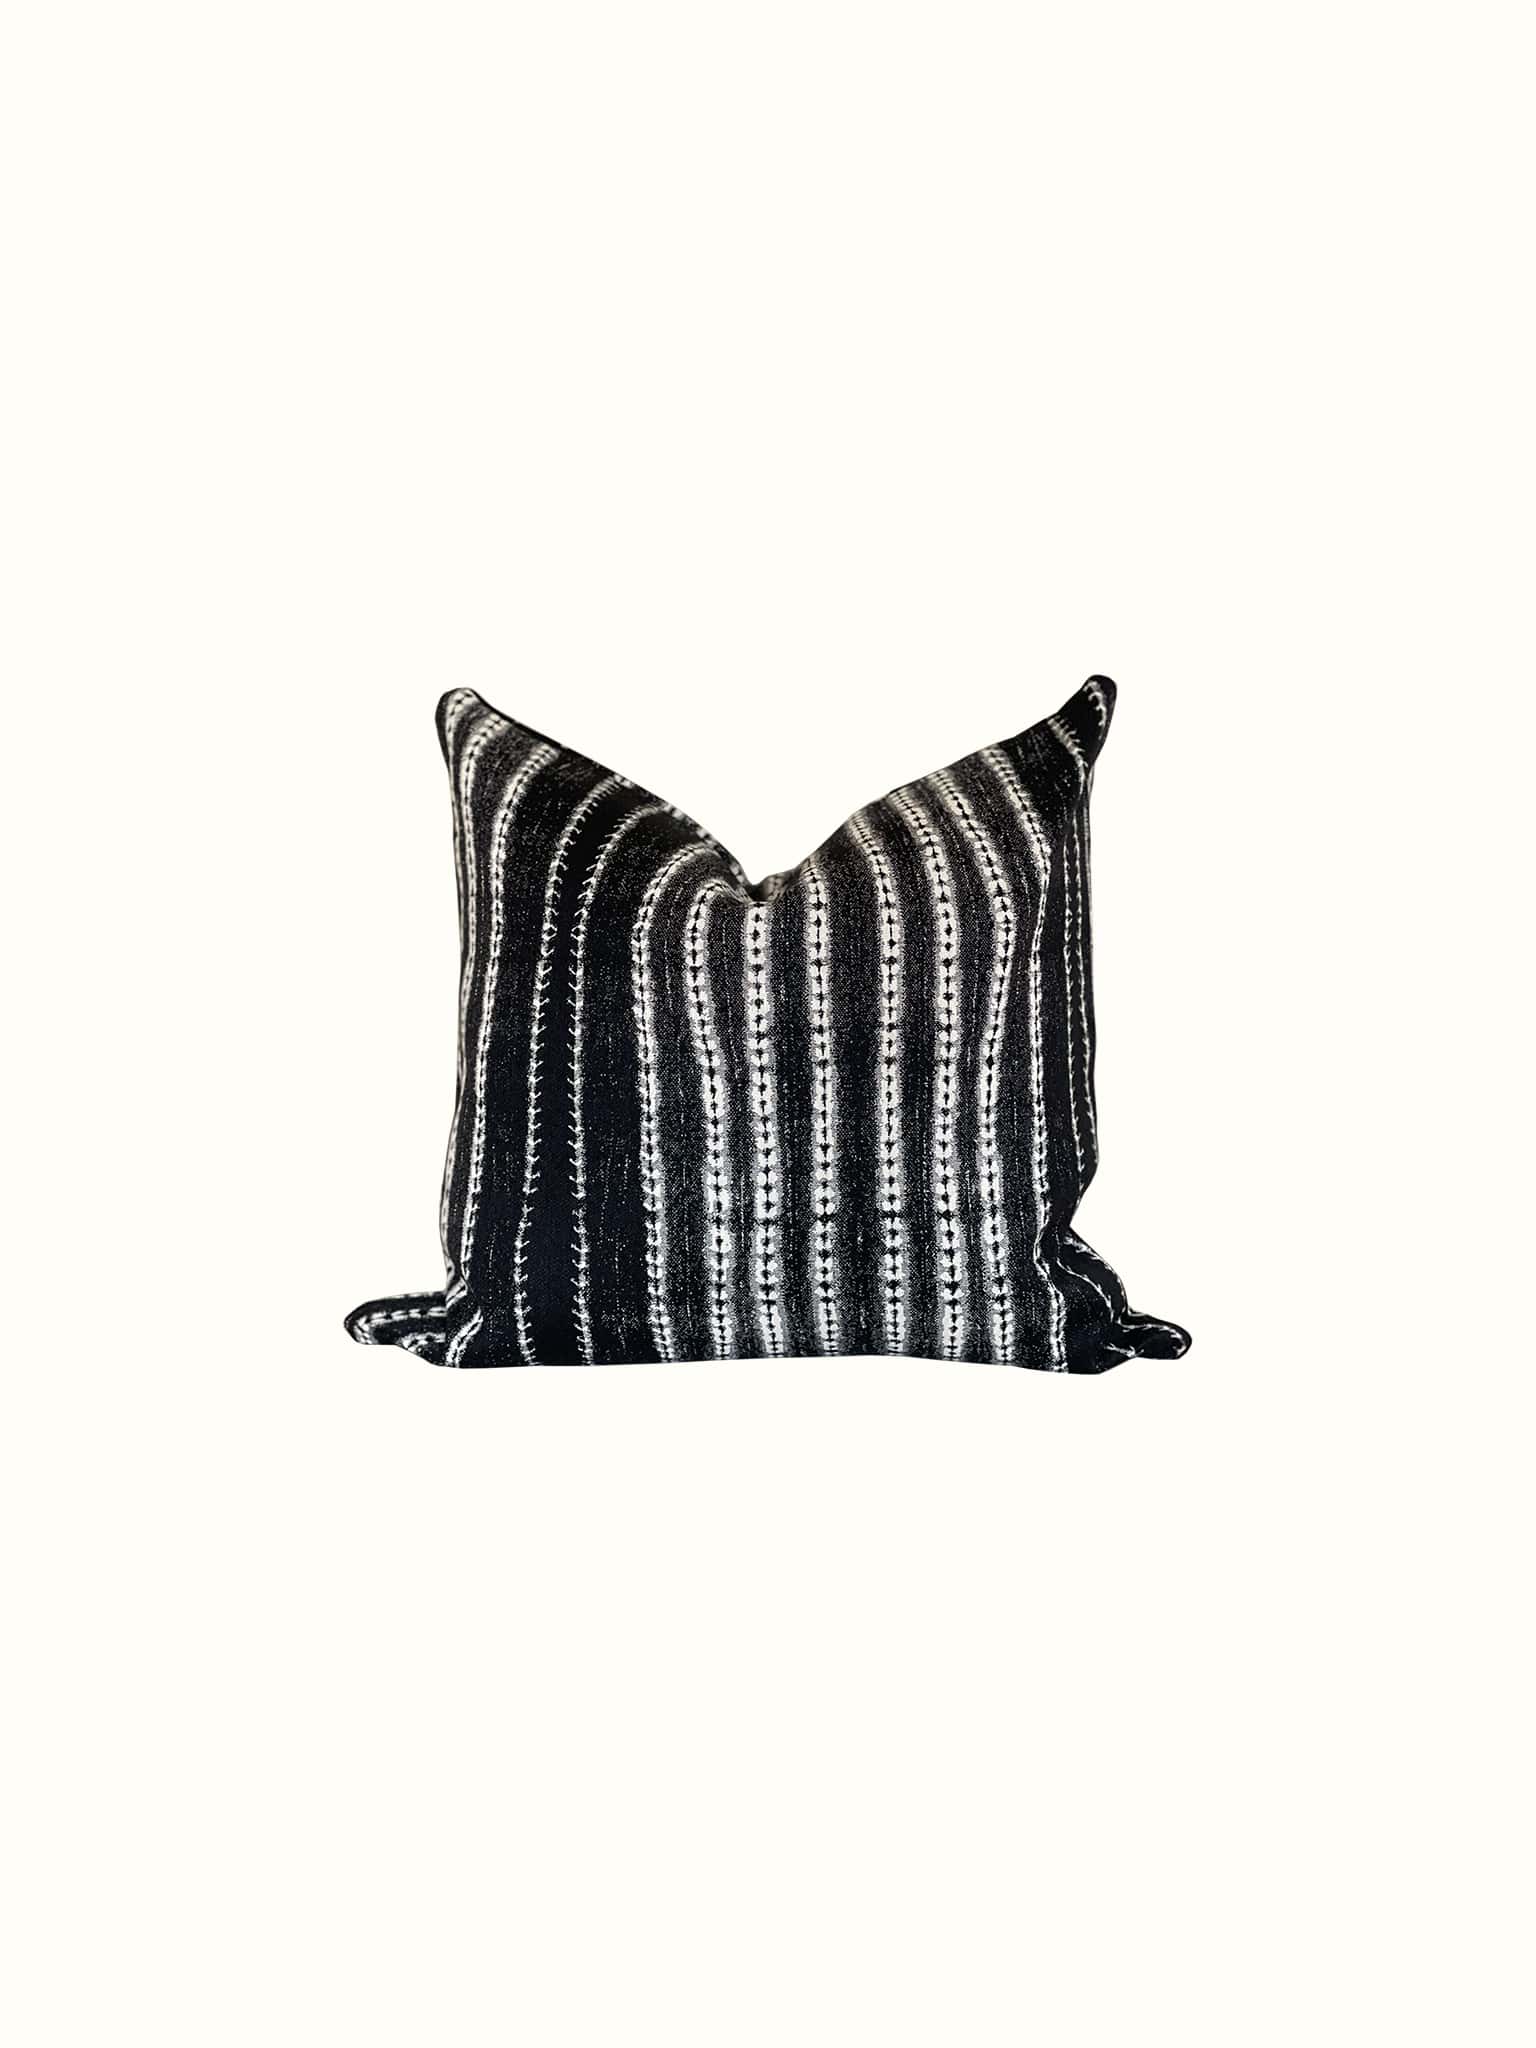 Unbalanced striped throw pillow in black and white gives modern fair at Cielle Home